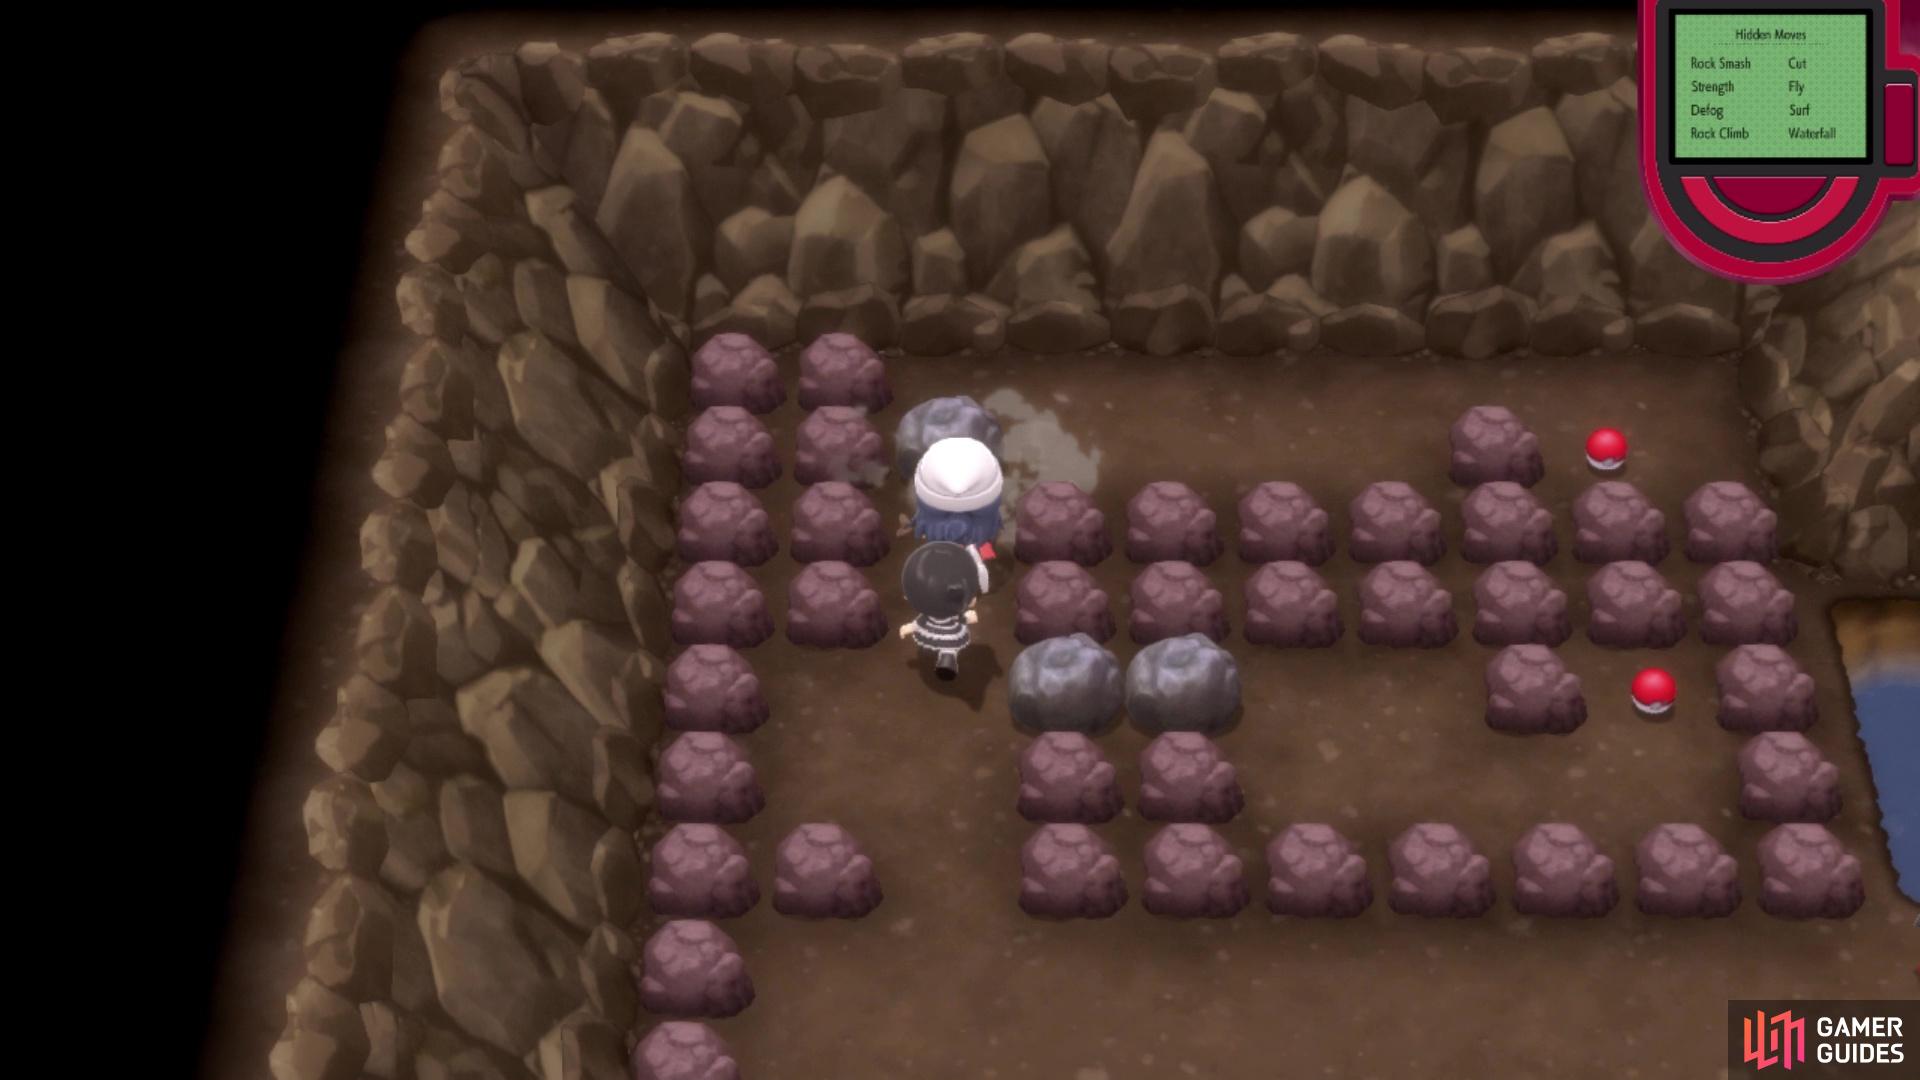 The dusk stone is in the Poké ball in the top right corner.